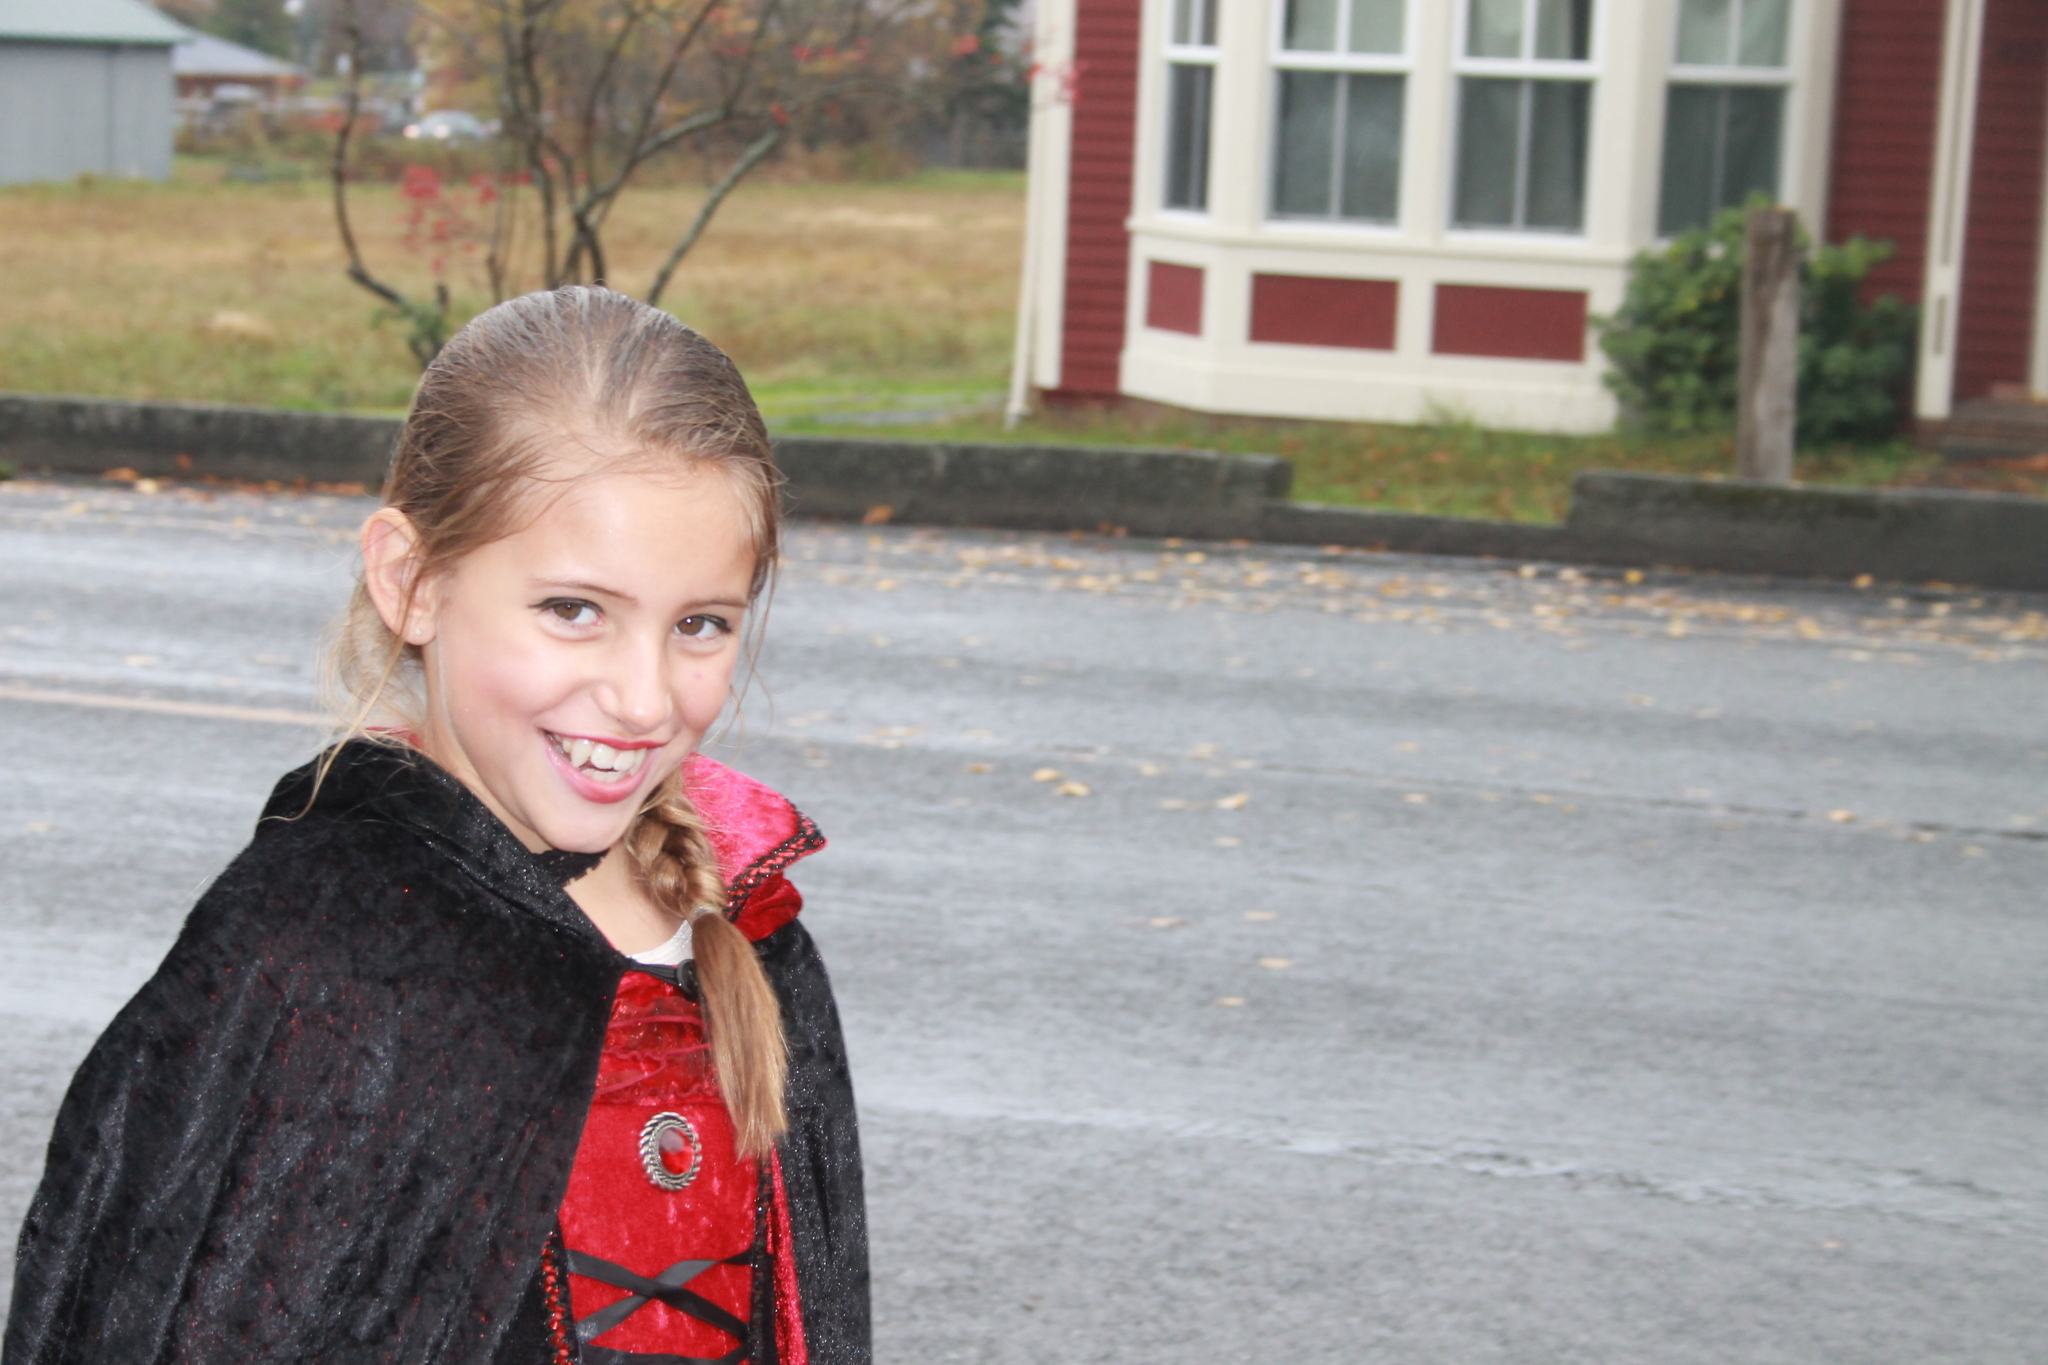 Vampires, unicorns and more in the Halloween Parade- Slide show